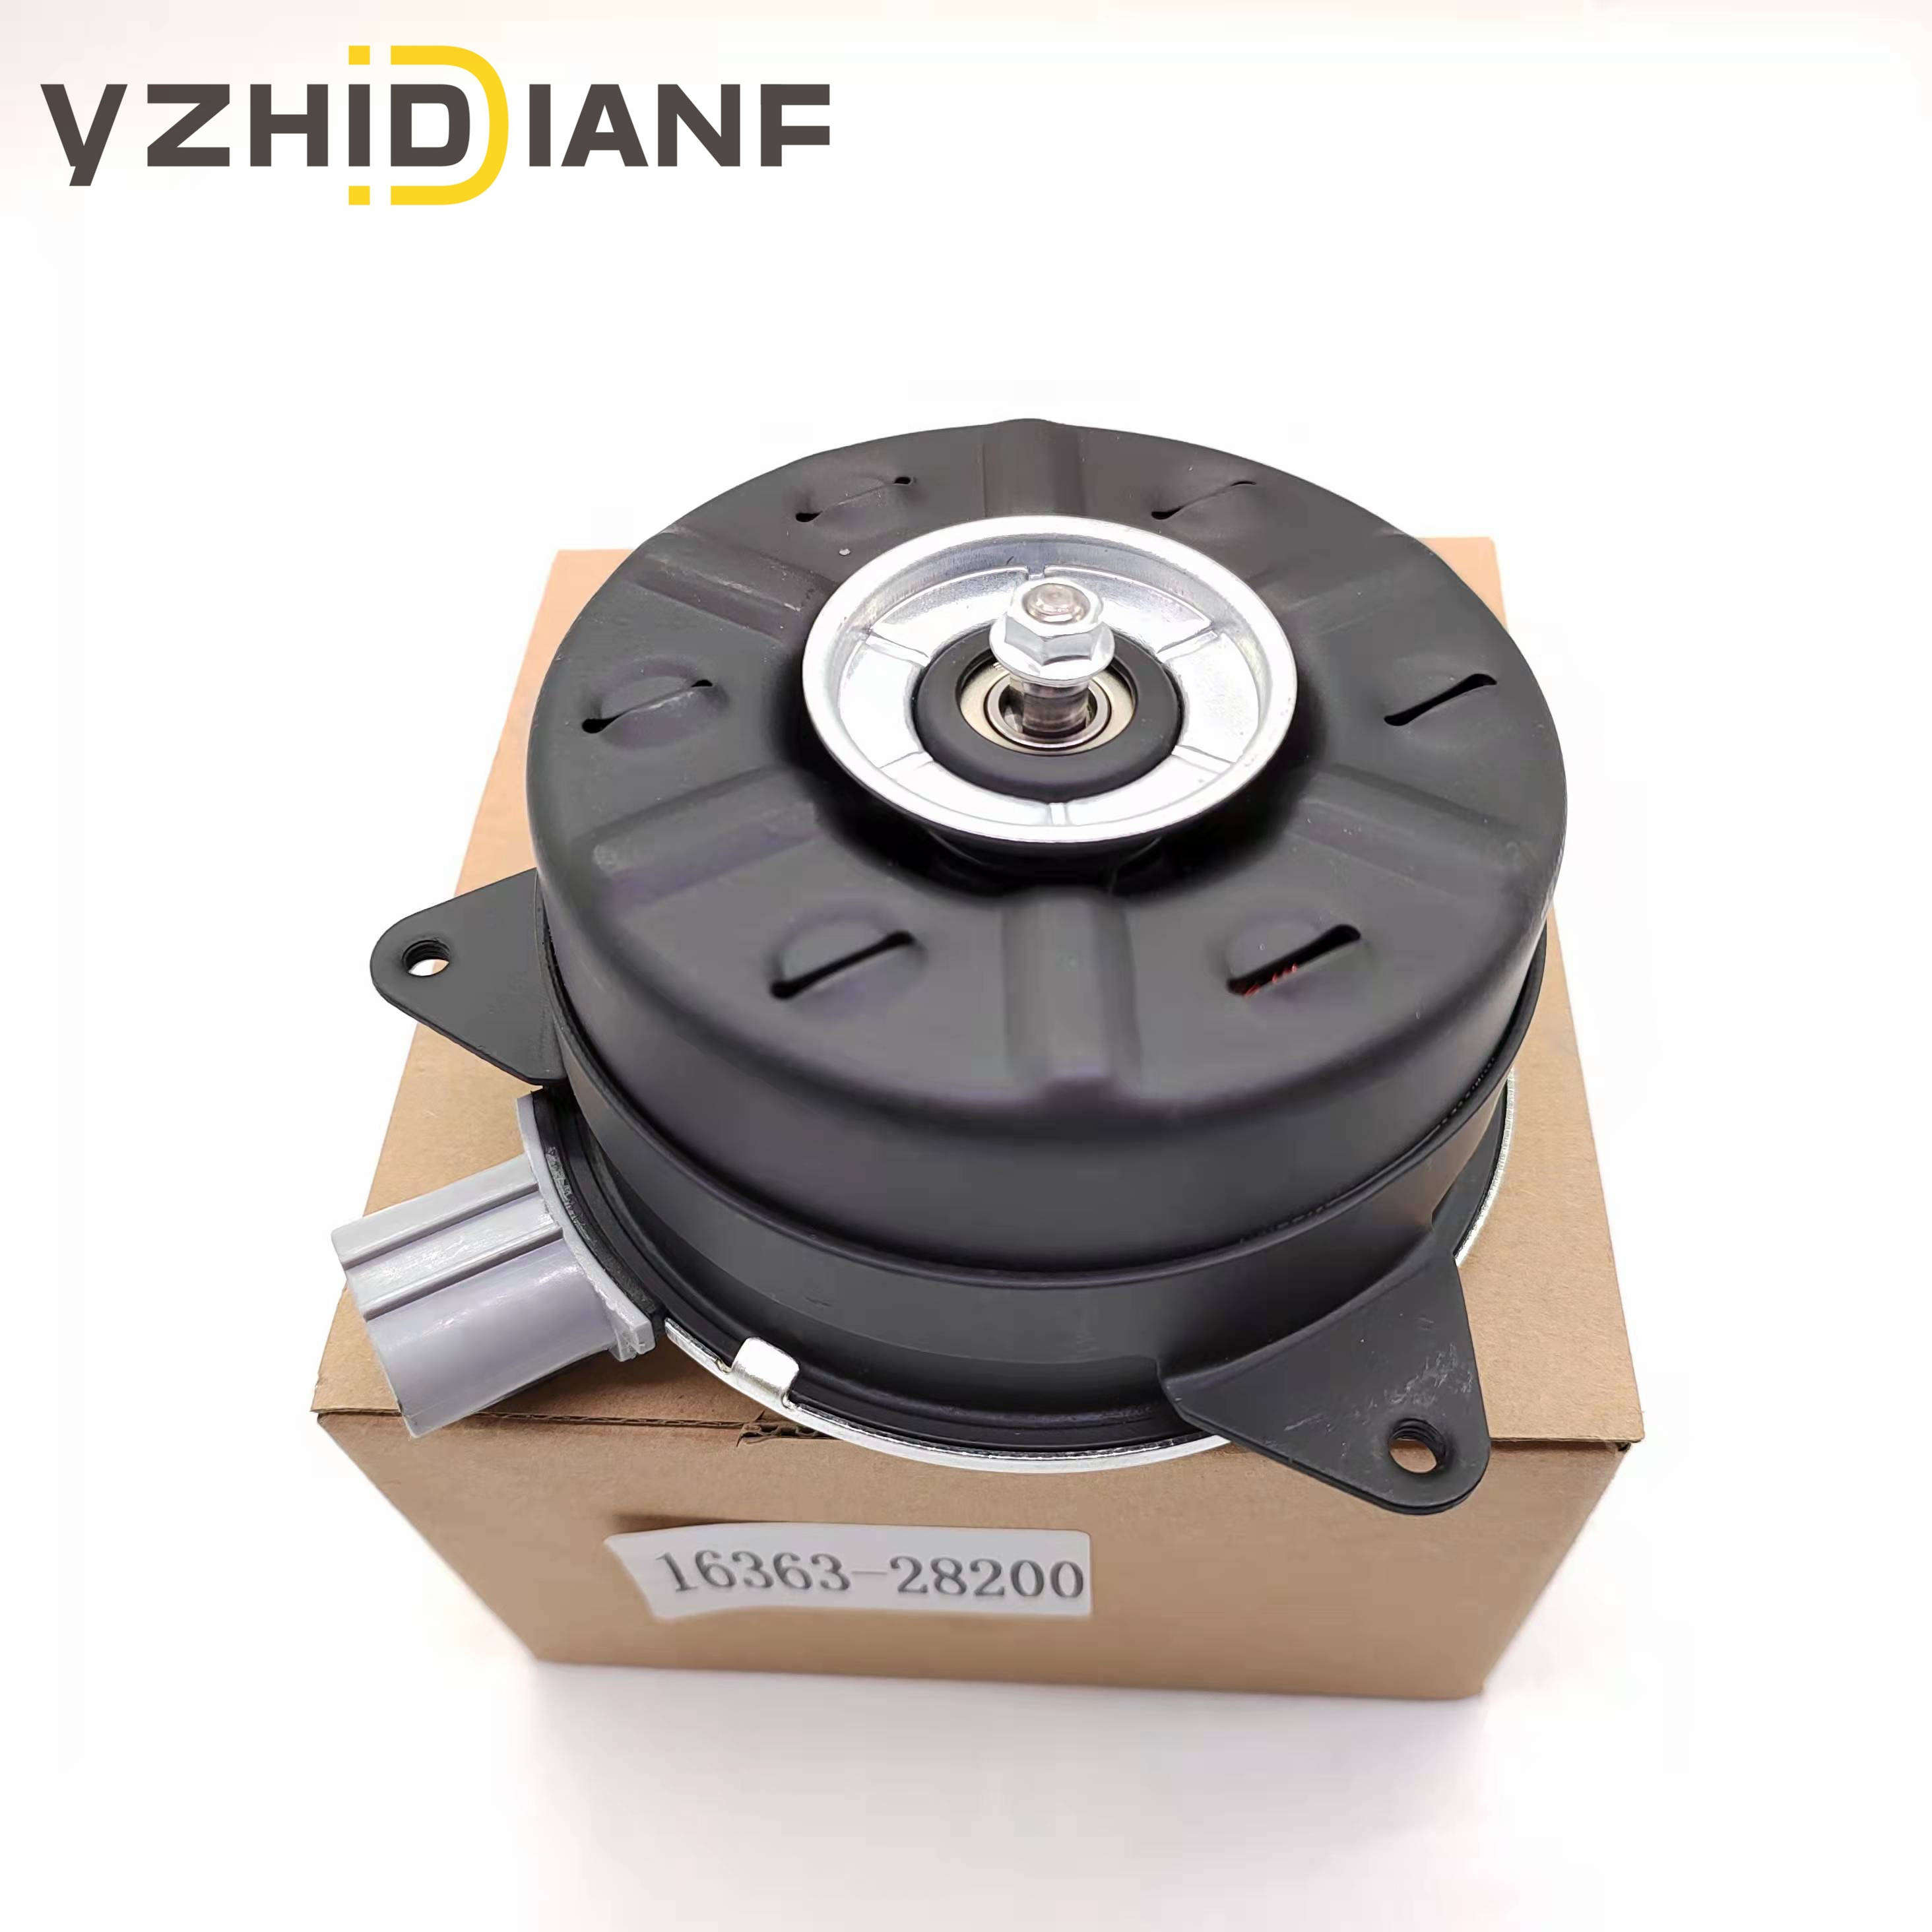 Factory Direct Auto Engine Cooling System Radiator Fan Motor 16363-0H110 168000-9430 For Toyota Yaris Camry Rav4